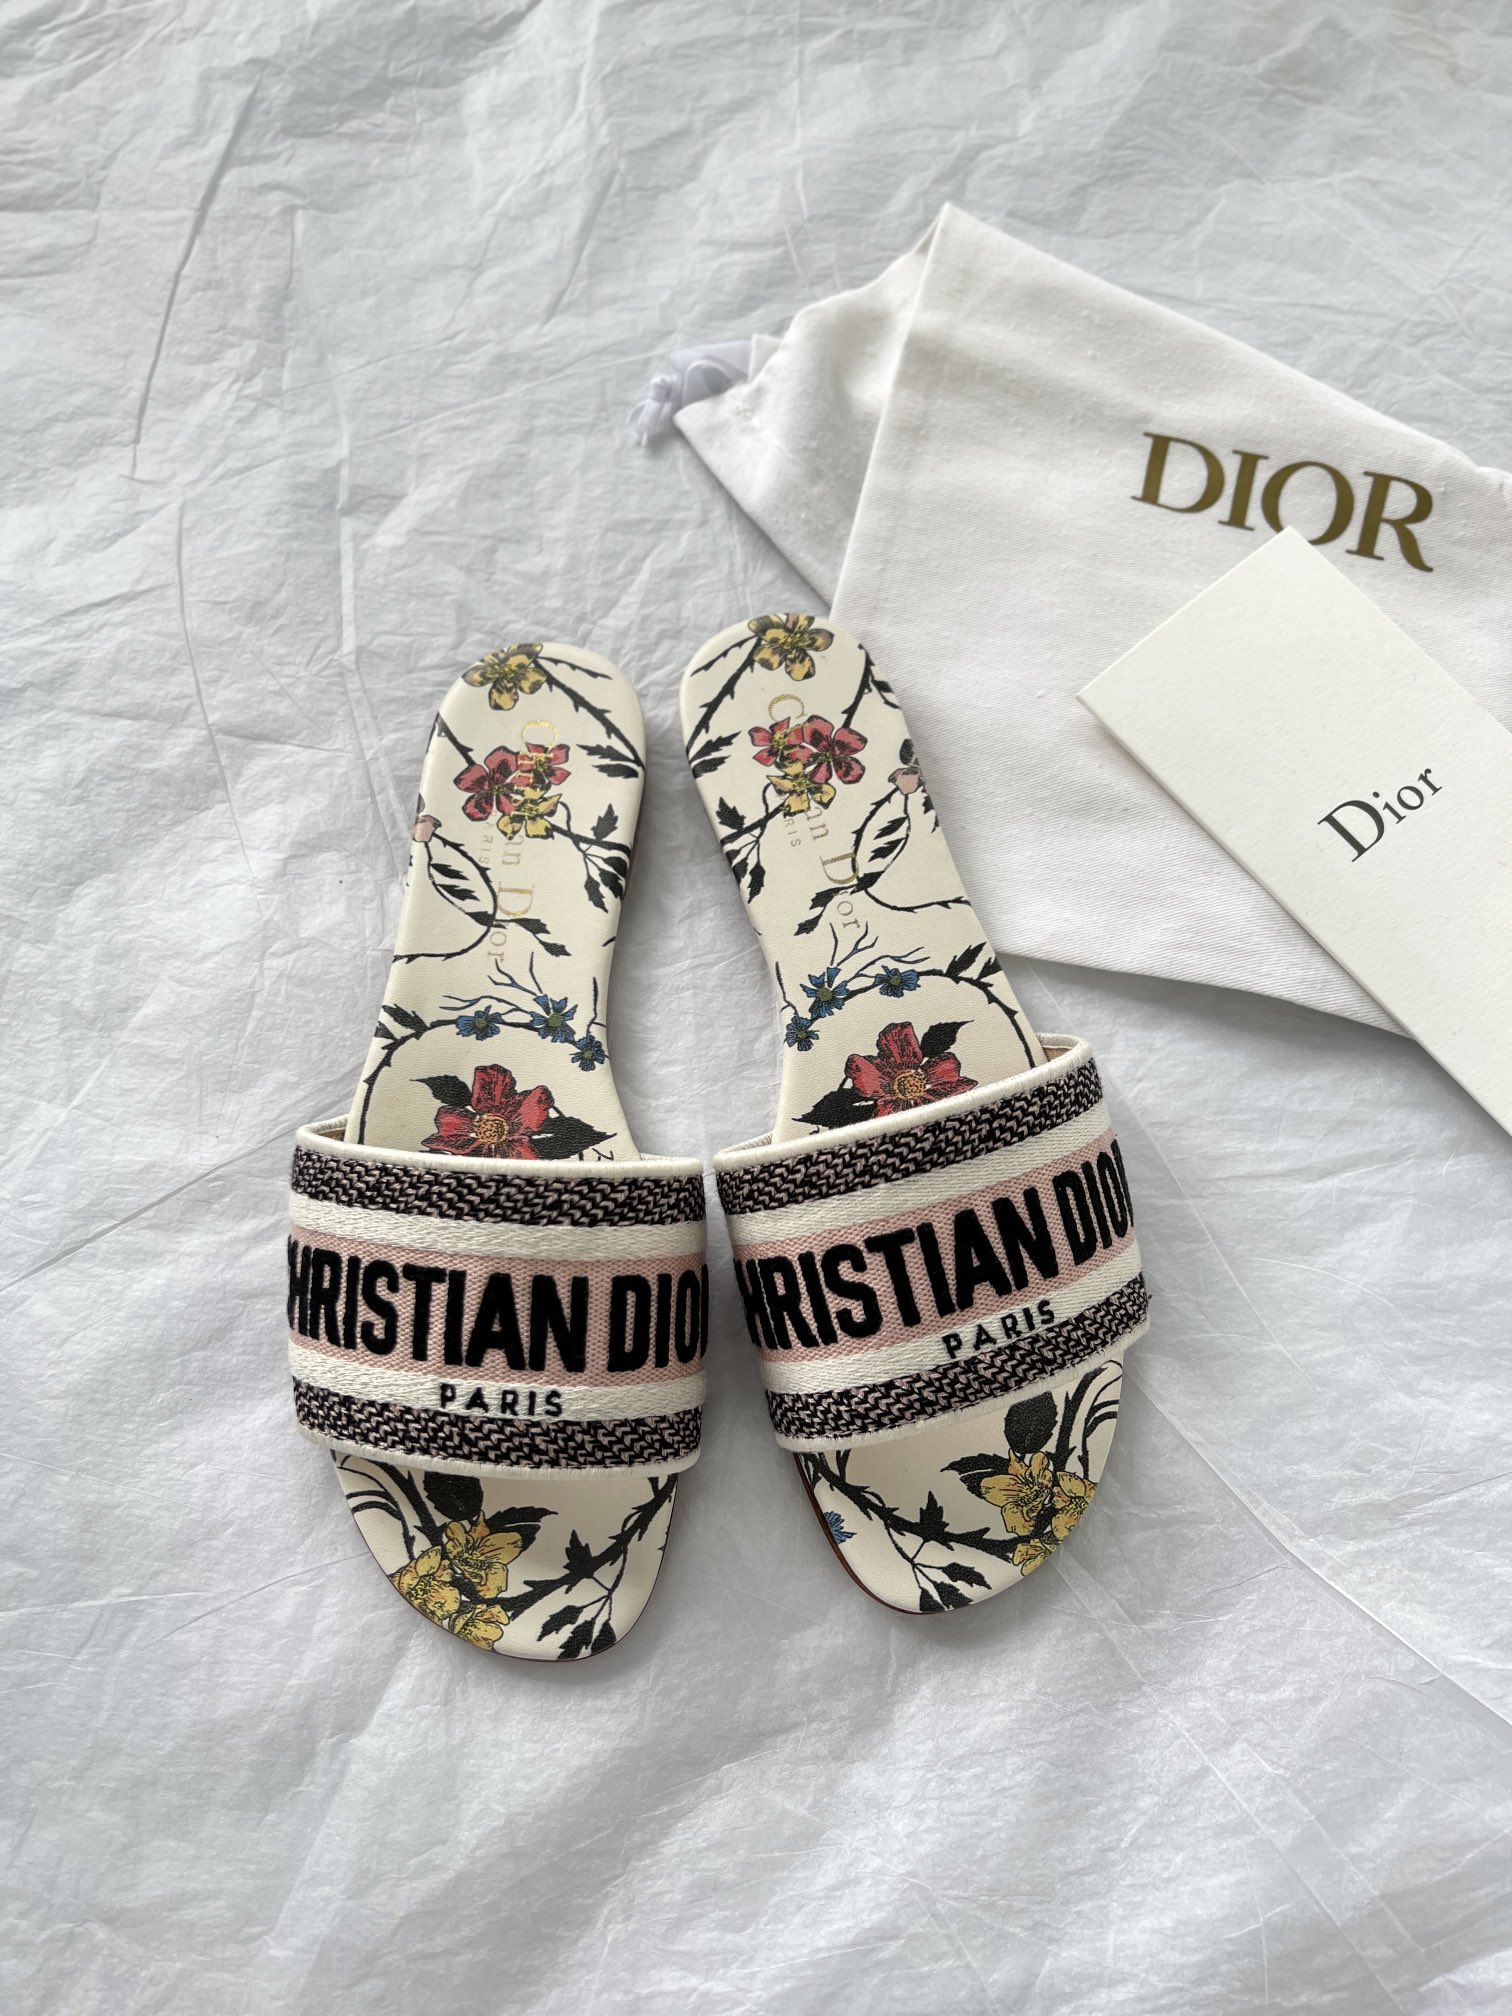 Dior Shoes Slippers Embroidery Cotton Cowhide Genuine Leather Spring/Summer Collection